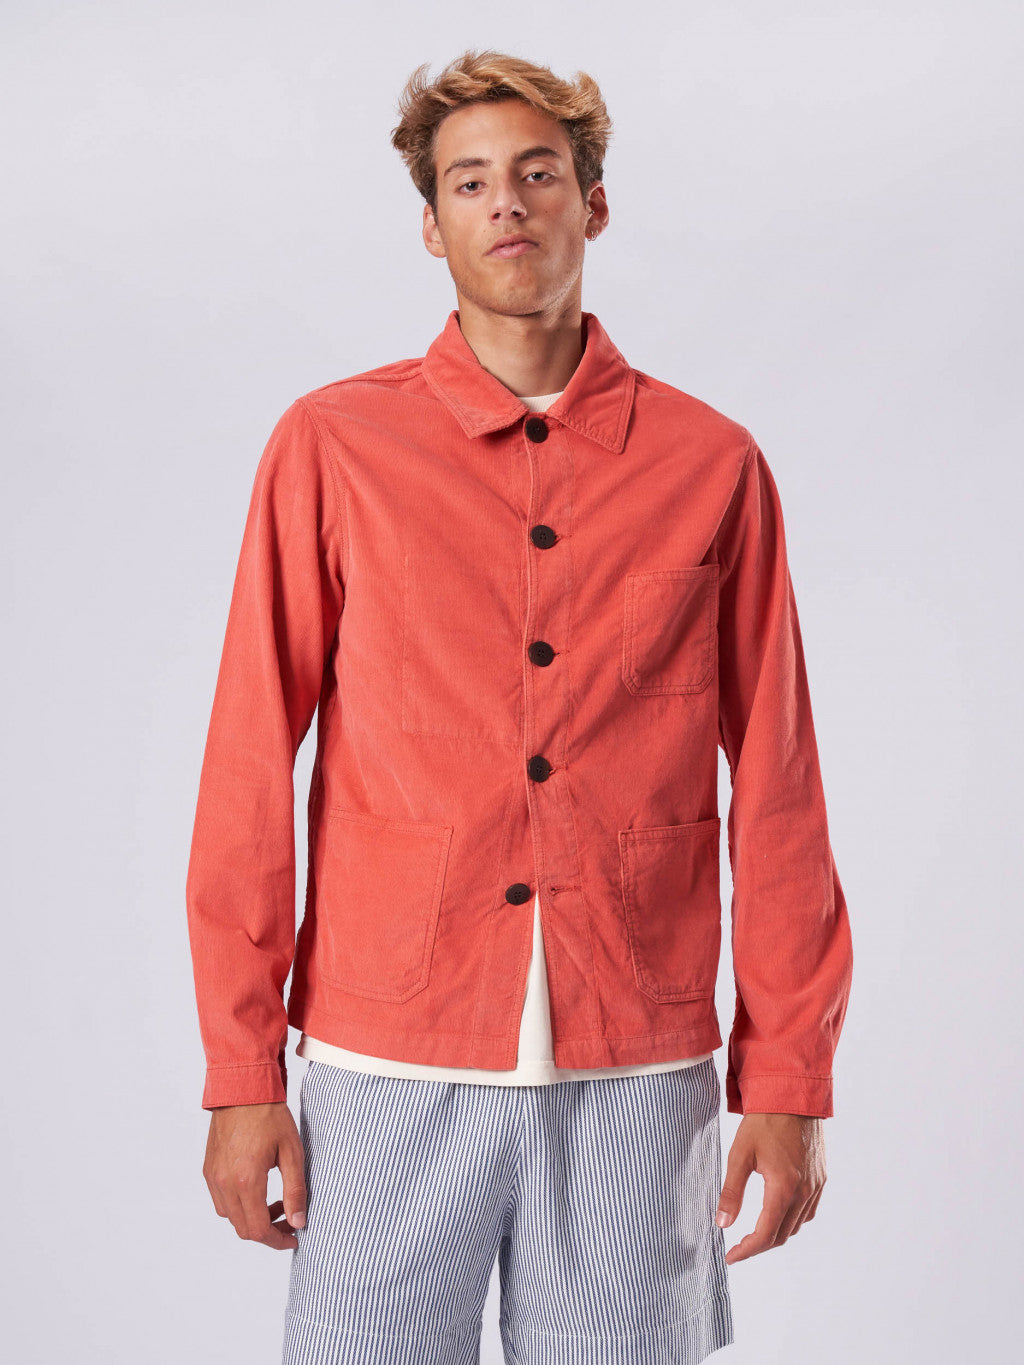 Worker jacket, spiced coral, baby cord